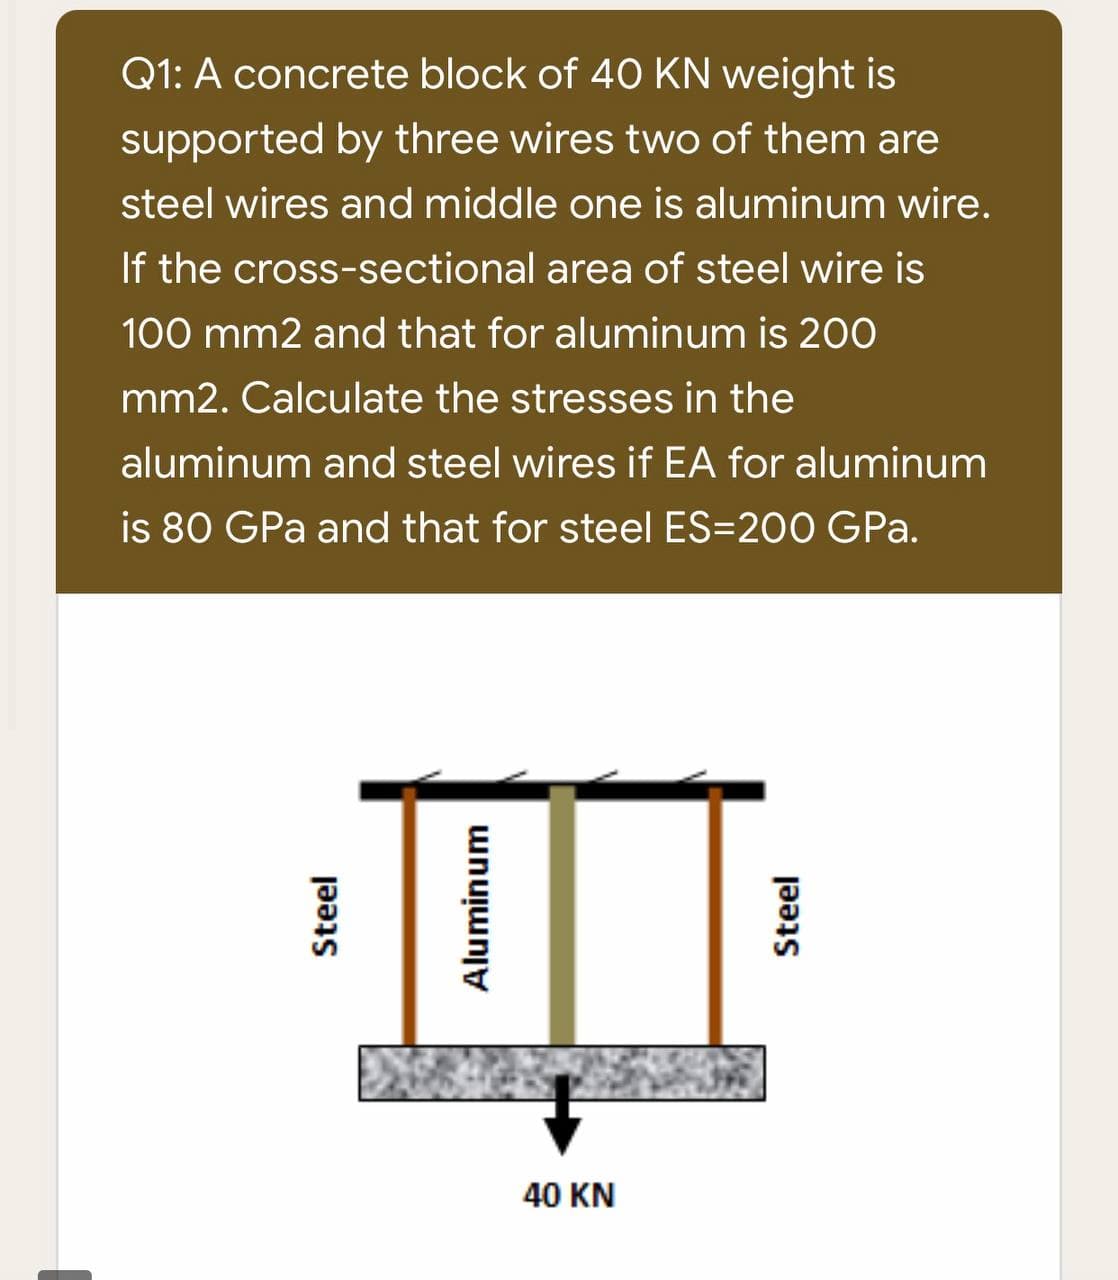 Q1: A concrete block of 40 KN weight is
supported by three wires two of them are
steel wires and middle one is aluminum wire.
If the cross-sectional area of steel wire is
100 mm2 and that for aluminum is 200
mm2. Calculate the stresses in the
aluminum and steel wires if EA for aluminum
is 80 GPa and that for steel ES=200 GPa.
40 KN
Steel
Aluminum
Steel
